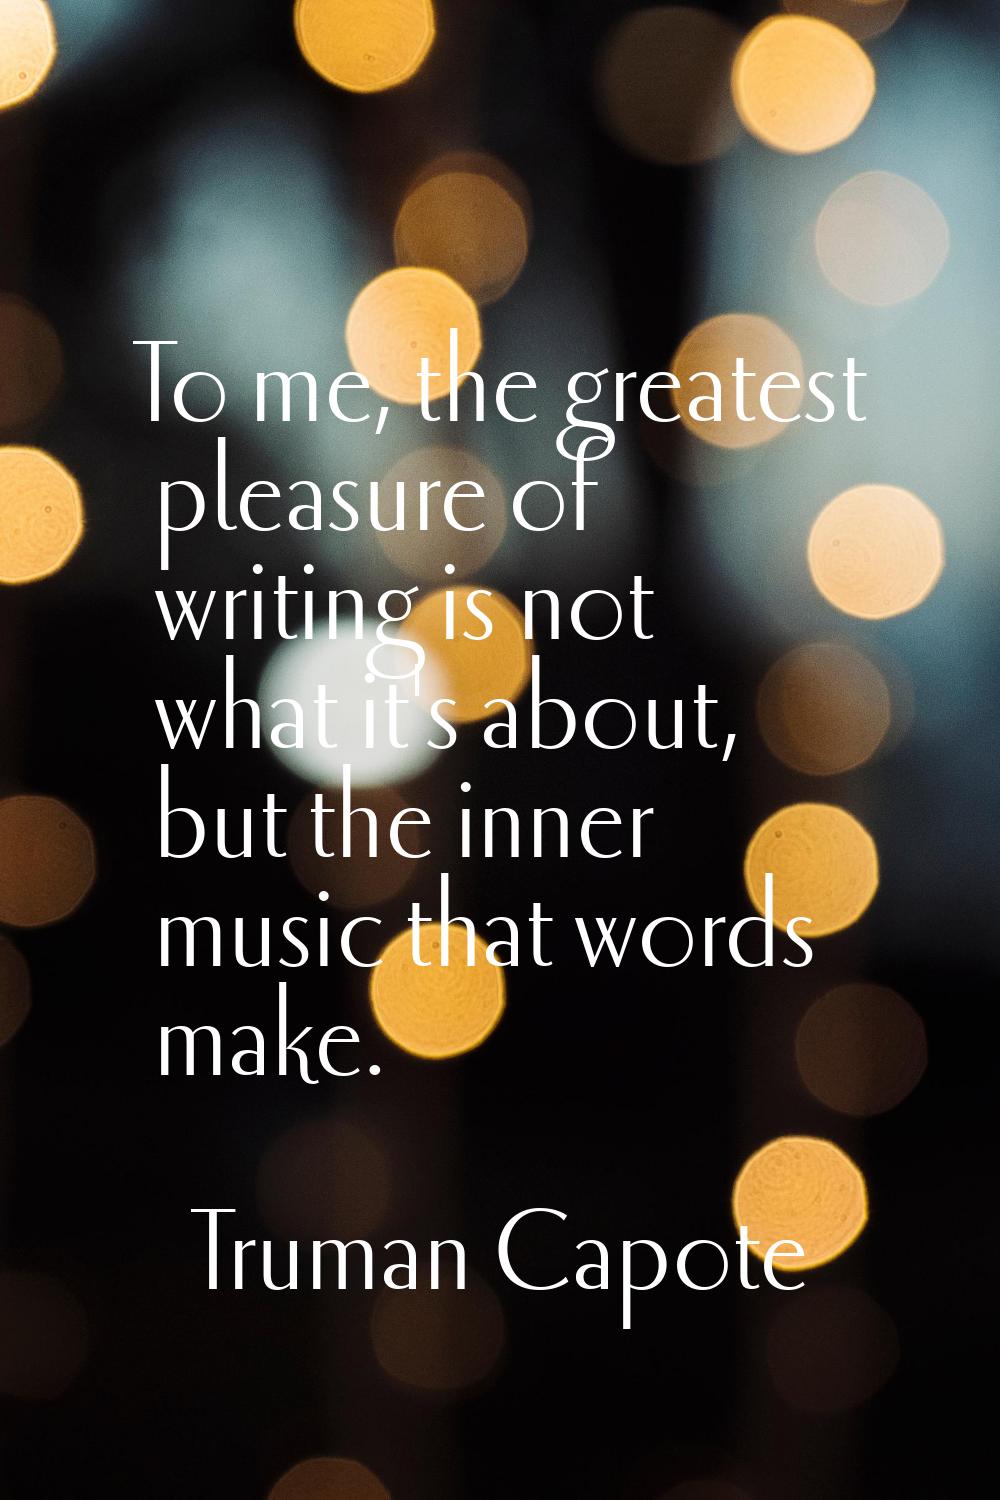 To me, the greatest pleasure of writing is not what it's about, but the inner music that words make